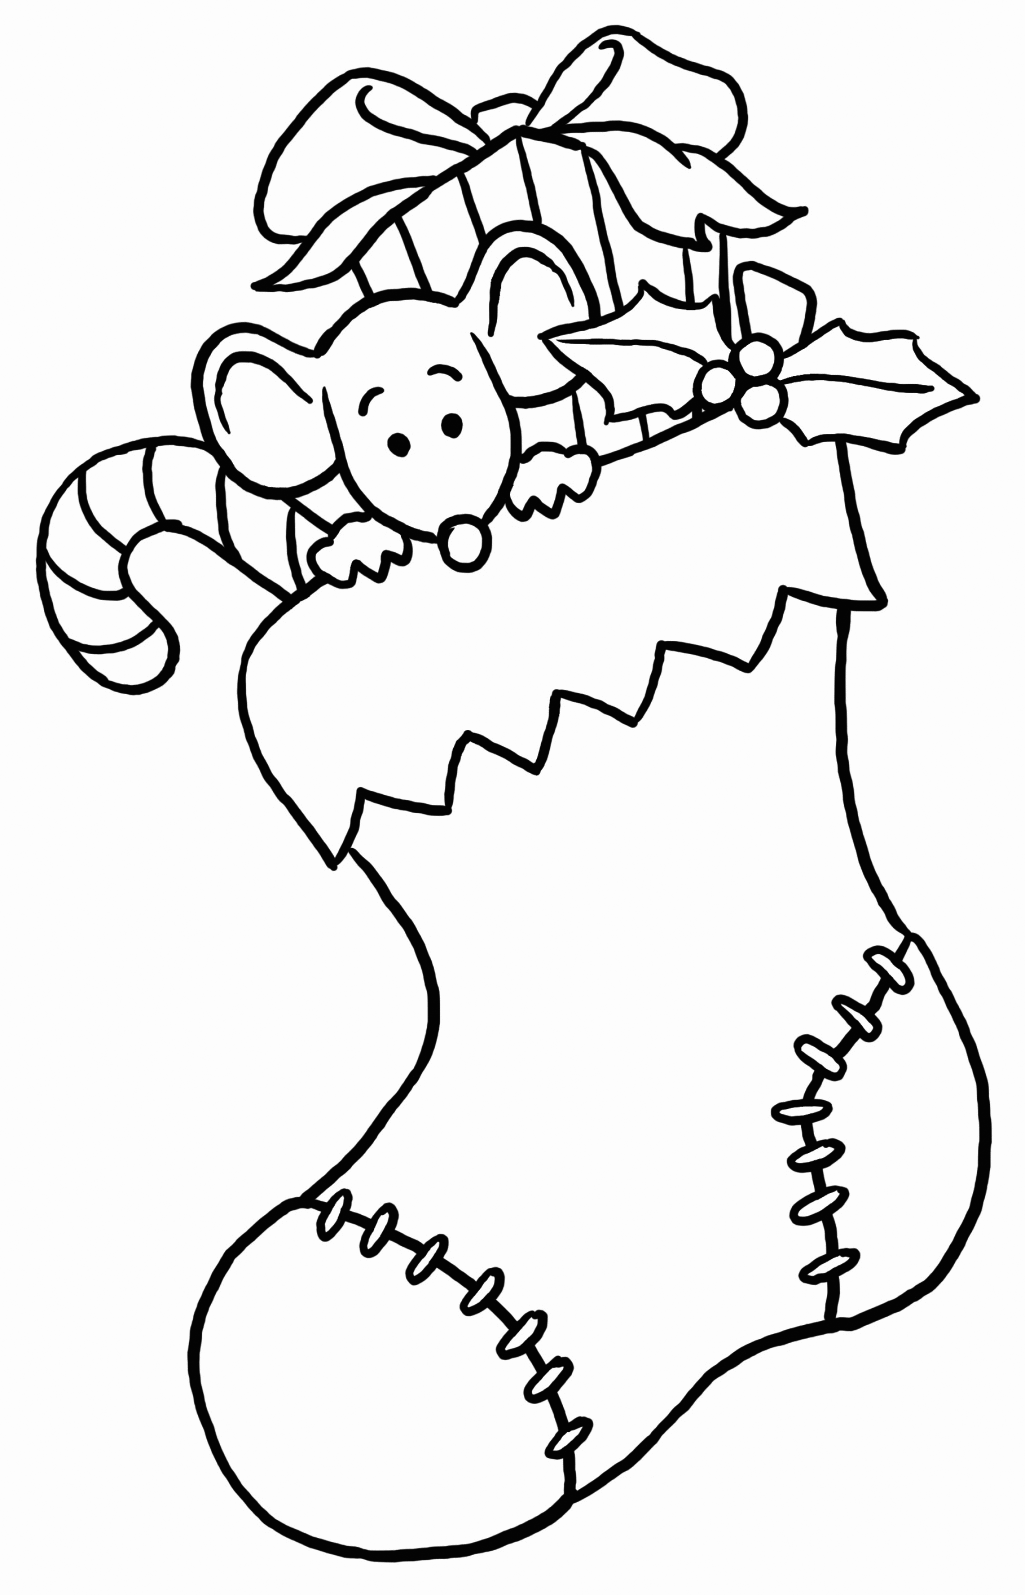 Holidays Coloring Pages   Best Coloring Pages For Kids